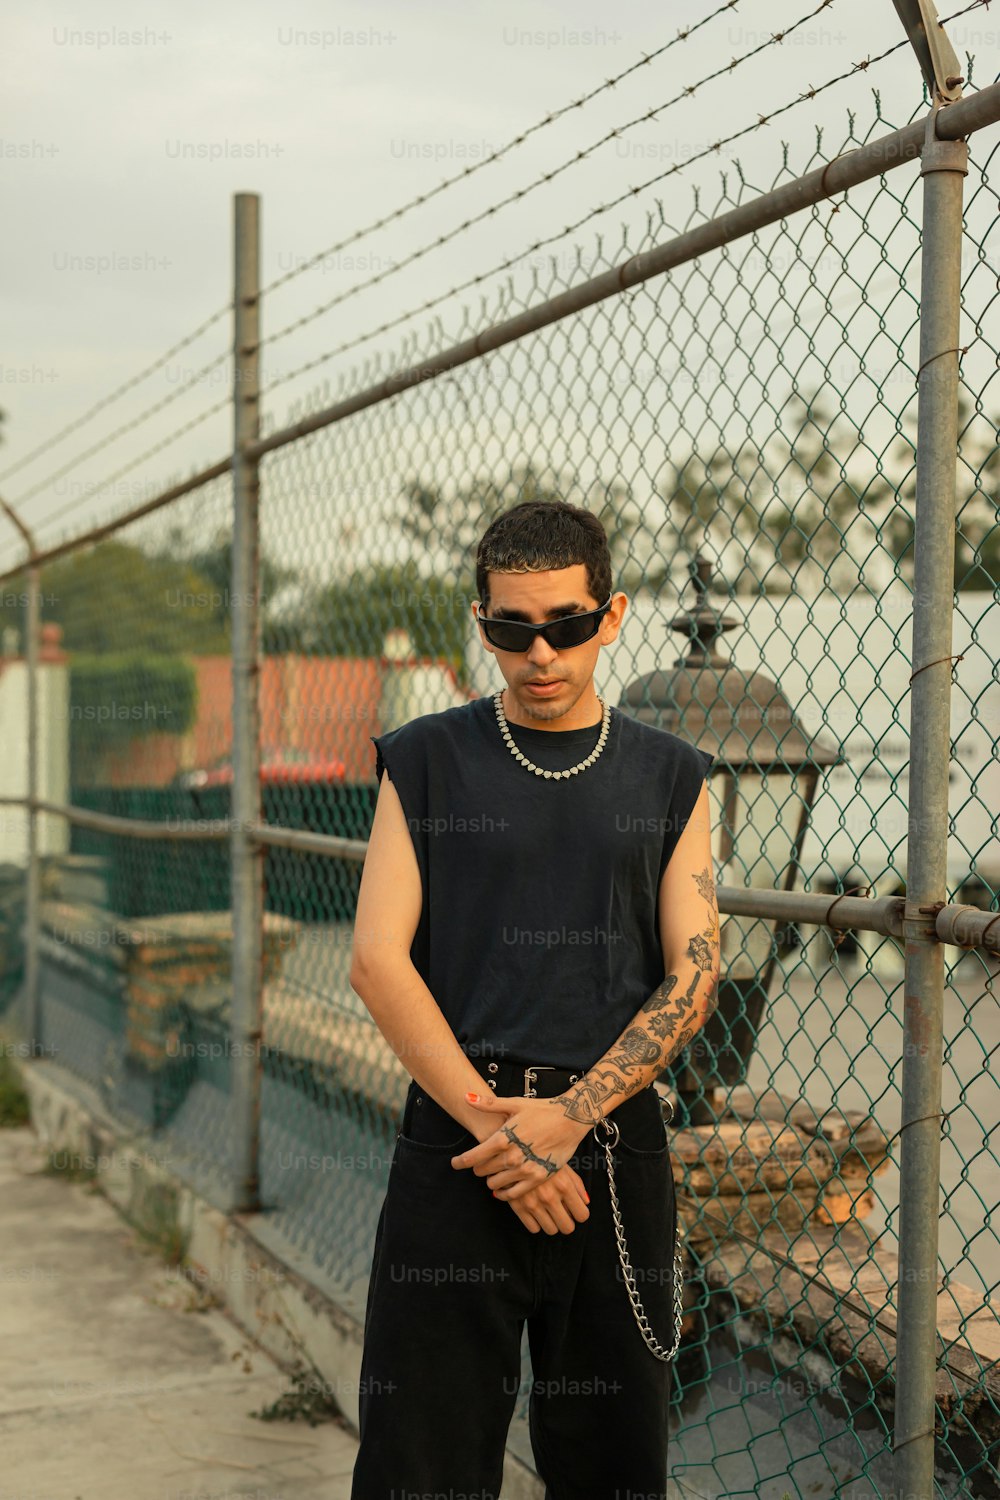 a man with a chain on his arm standing in front of a fence